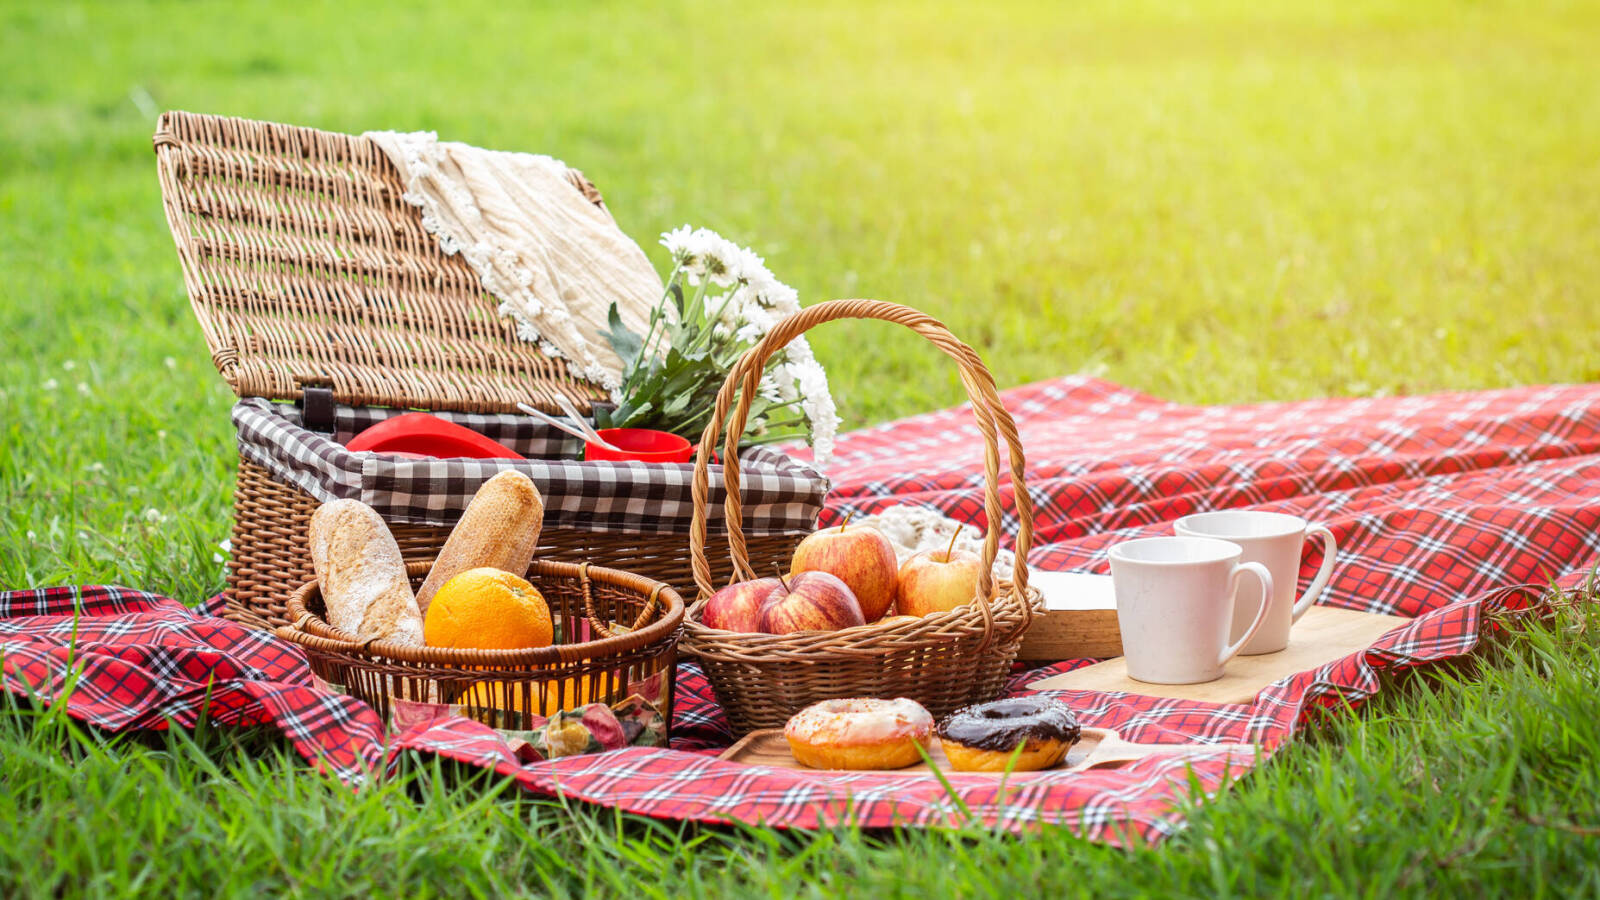 25 recipes that are perfect for your picnic basket